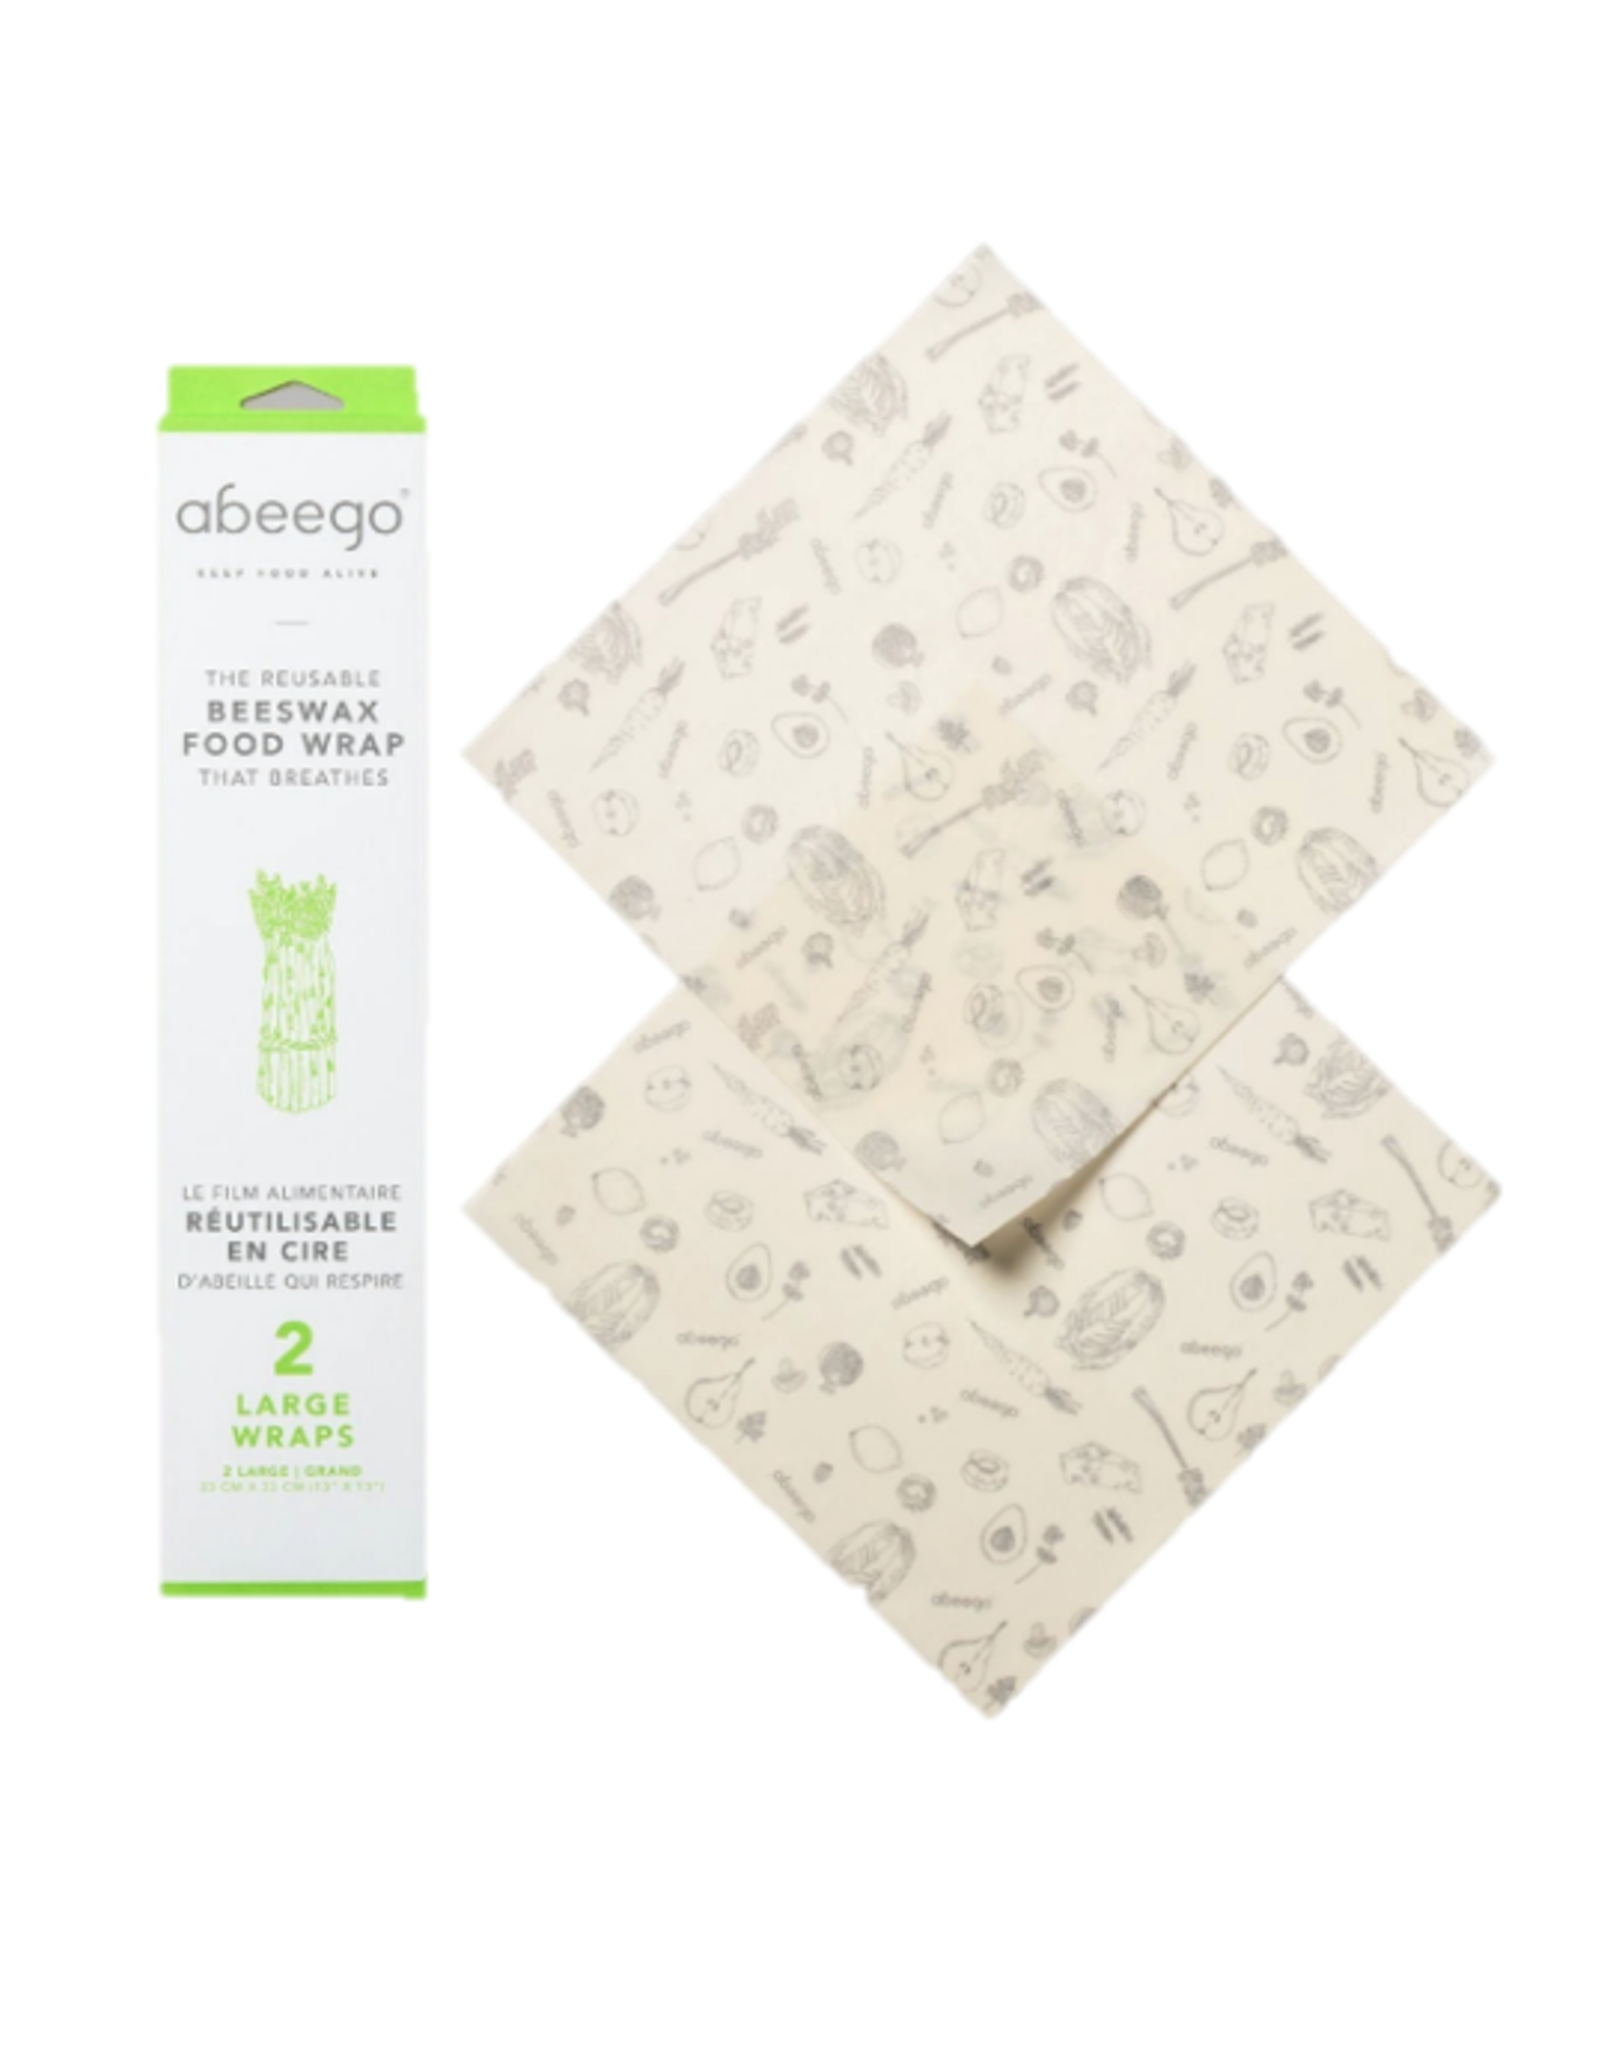 Abeego - Beeswax Wrap / Set 2, Large Square